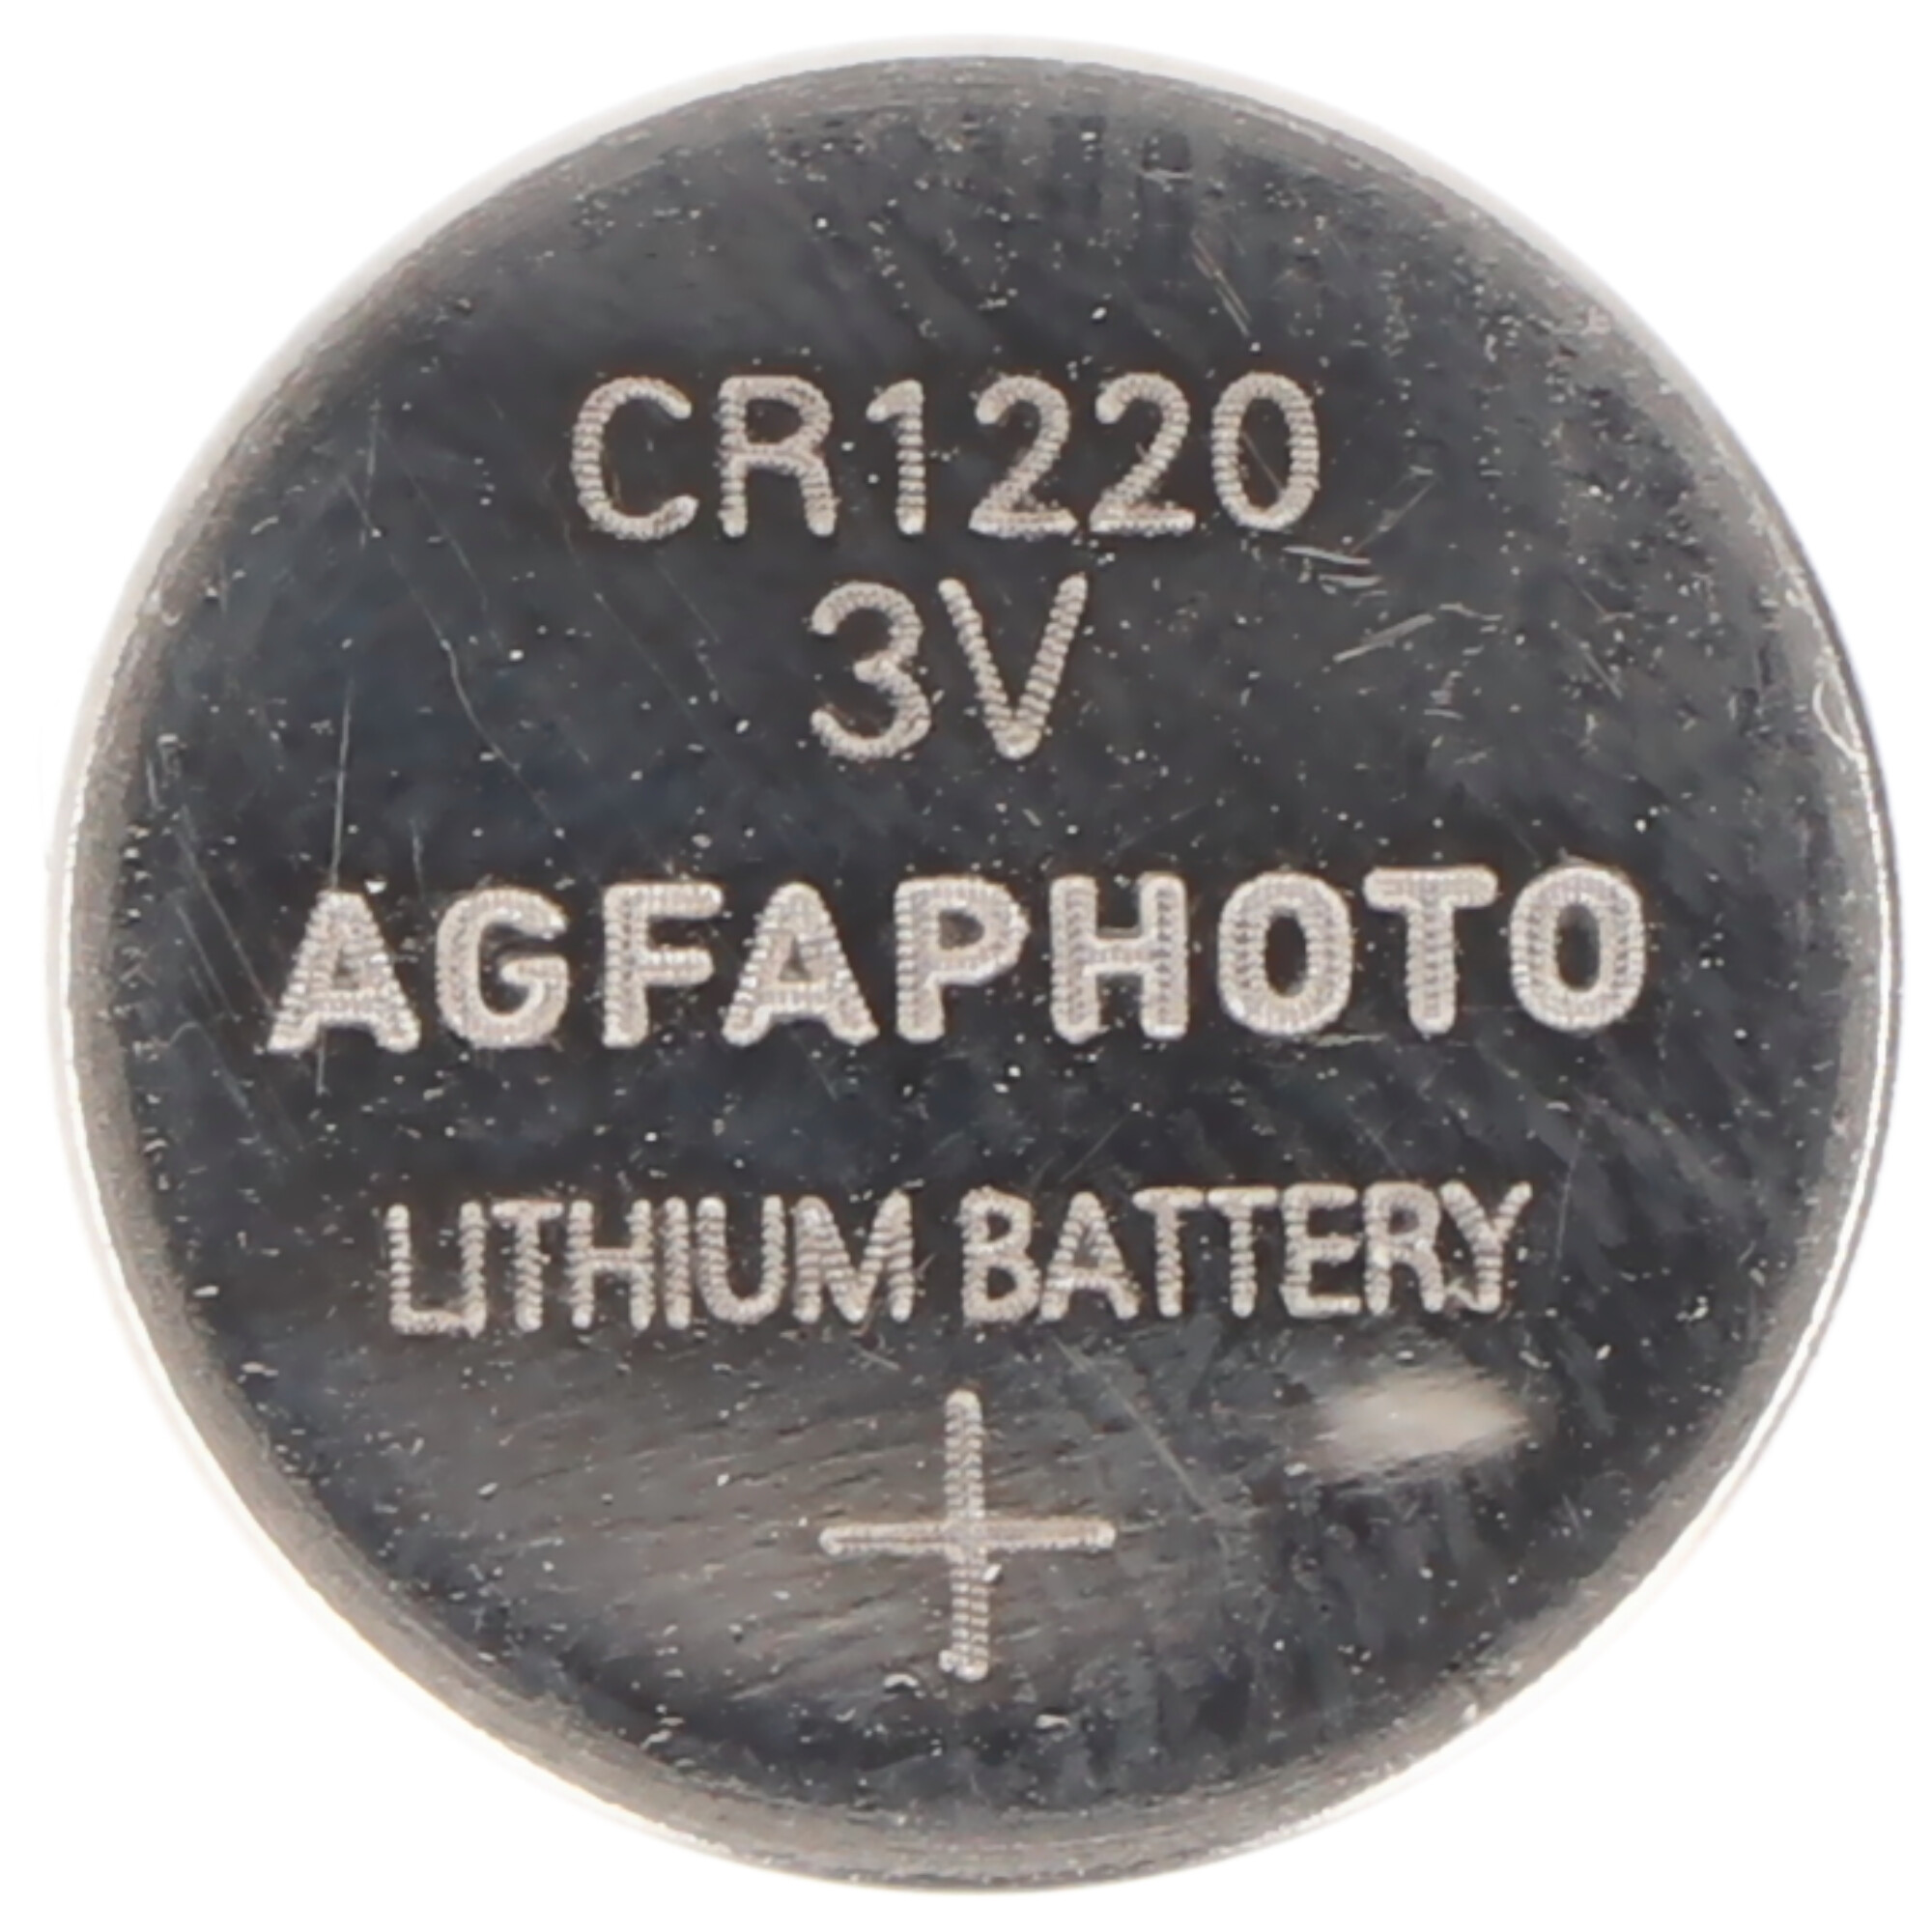 Agfaphoto Batterie Lithium, Knopfzelle, CR1220, 3V Extreme, Retail Blister (5-Pack)